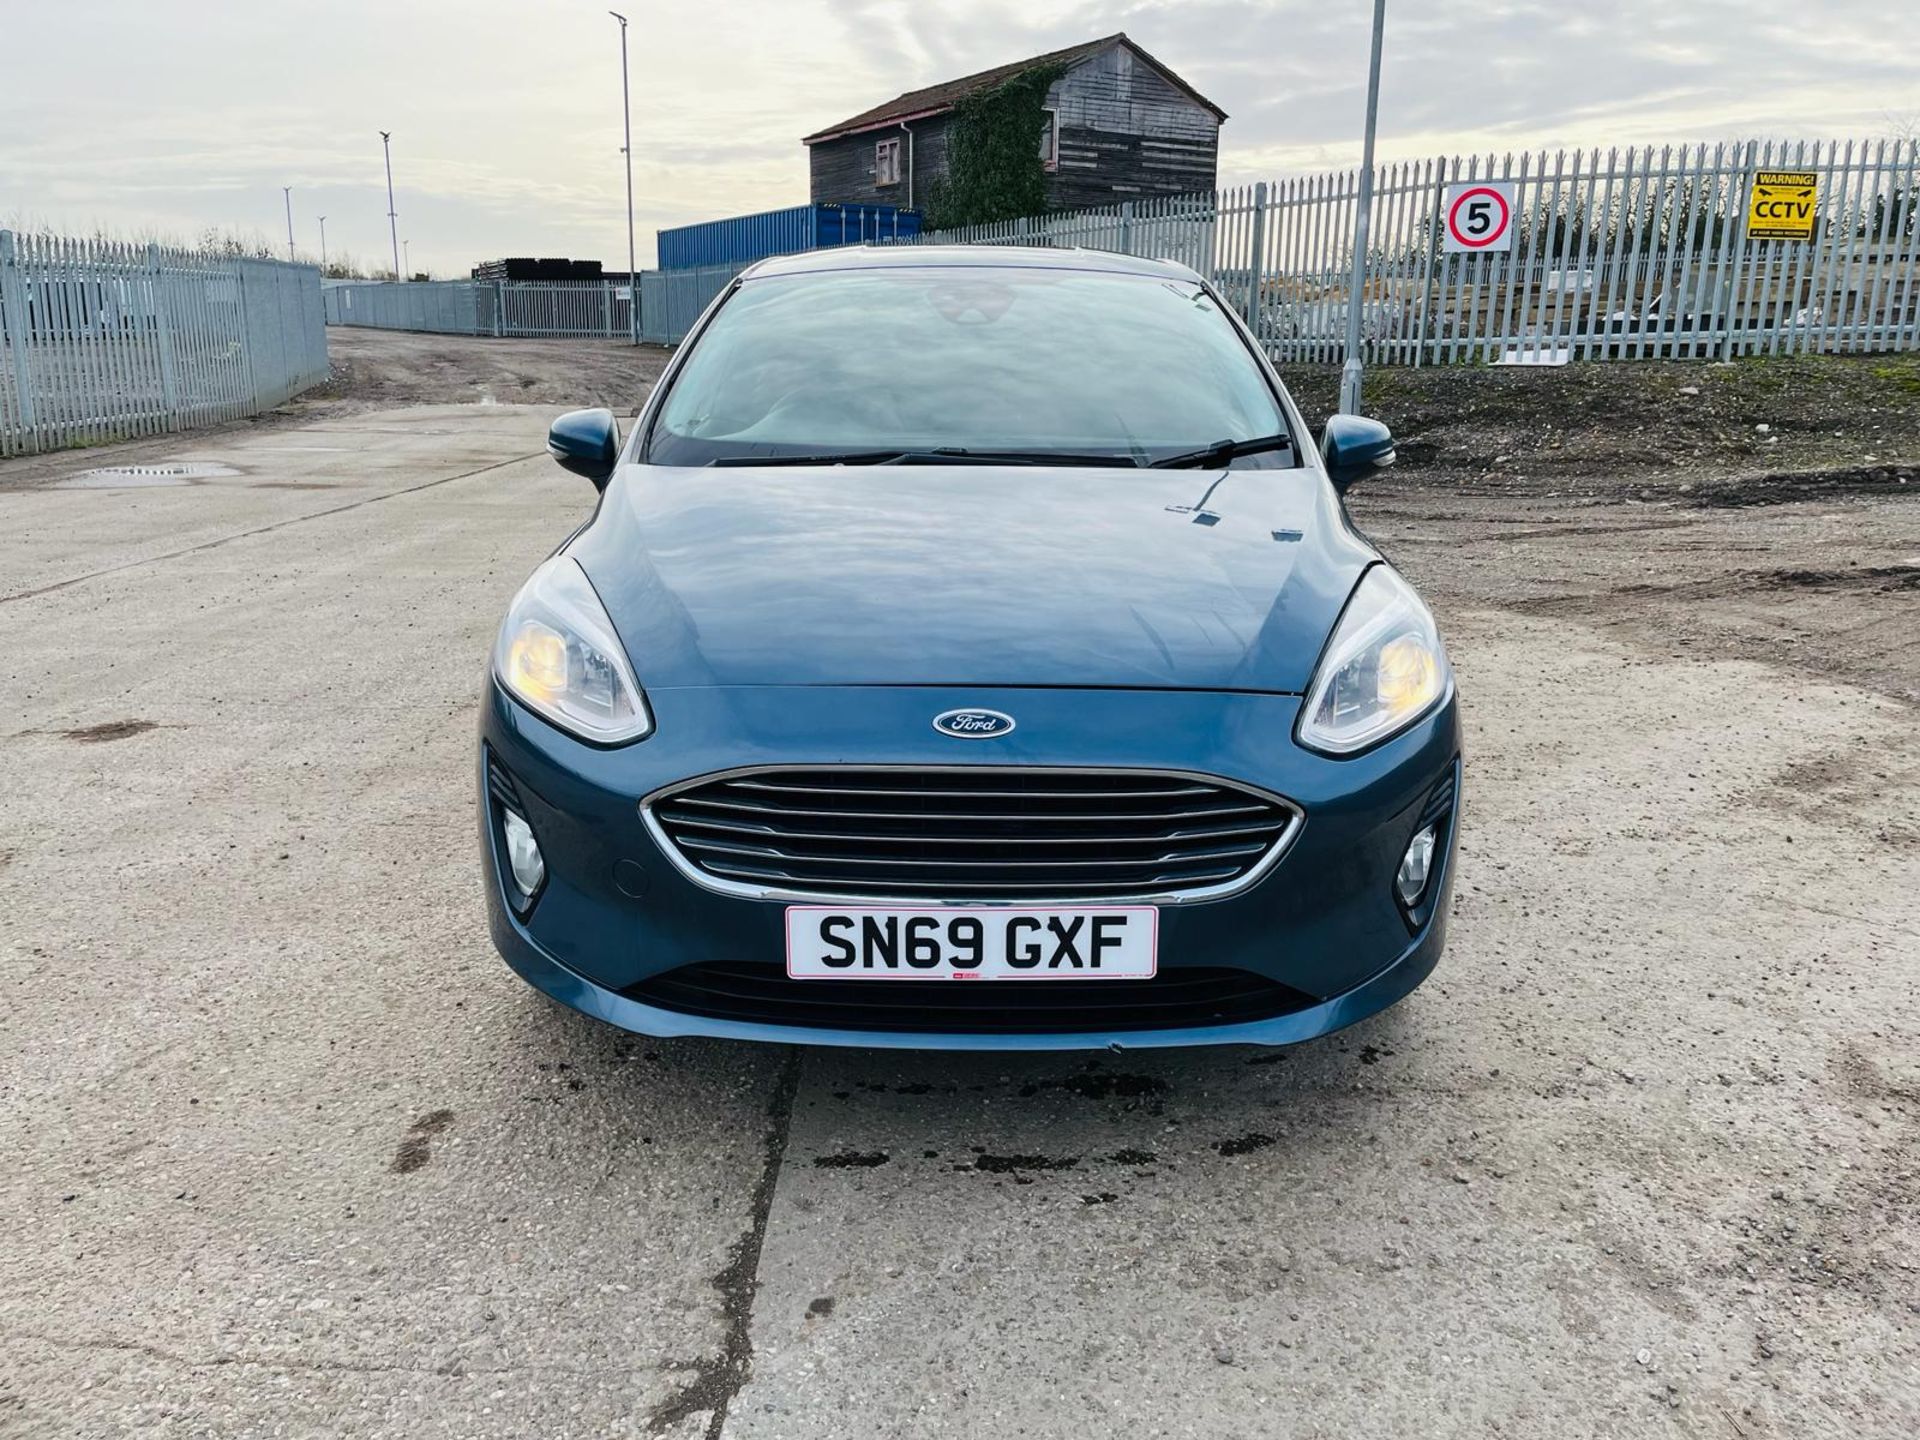 ** ON SALE ** Ford Fiesta Trend Ti-VCT 85 - 2019 '69 Reg' -No Vat-ULEZ Compliant - Only 48,539 miles - Image 2 of 32